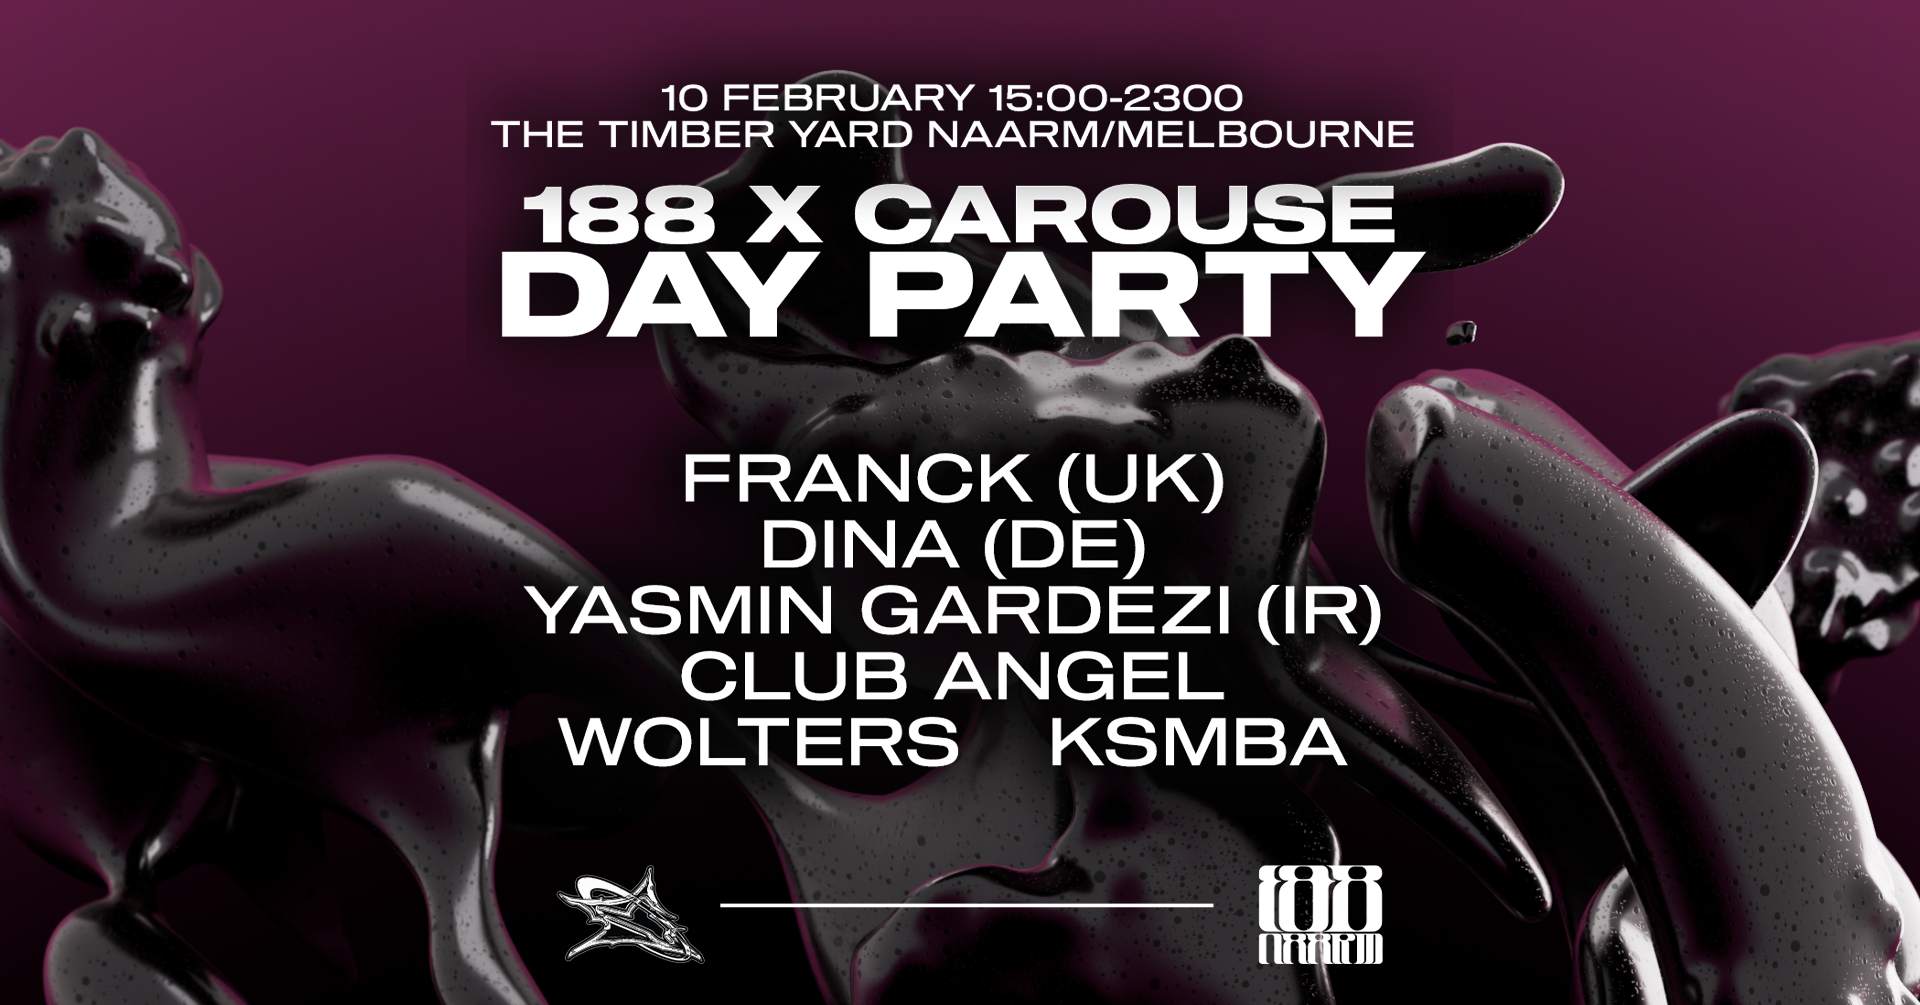 188 x Carouse - Day Party at The Timber Yard, Melbourne